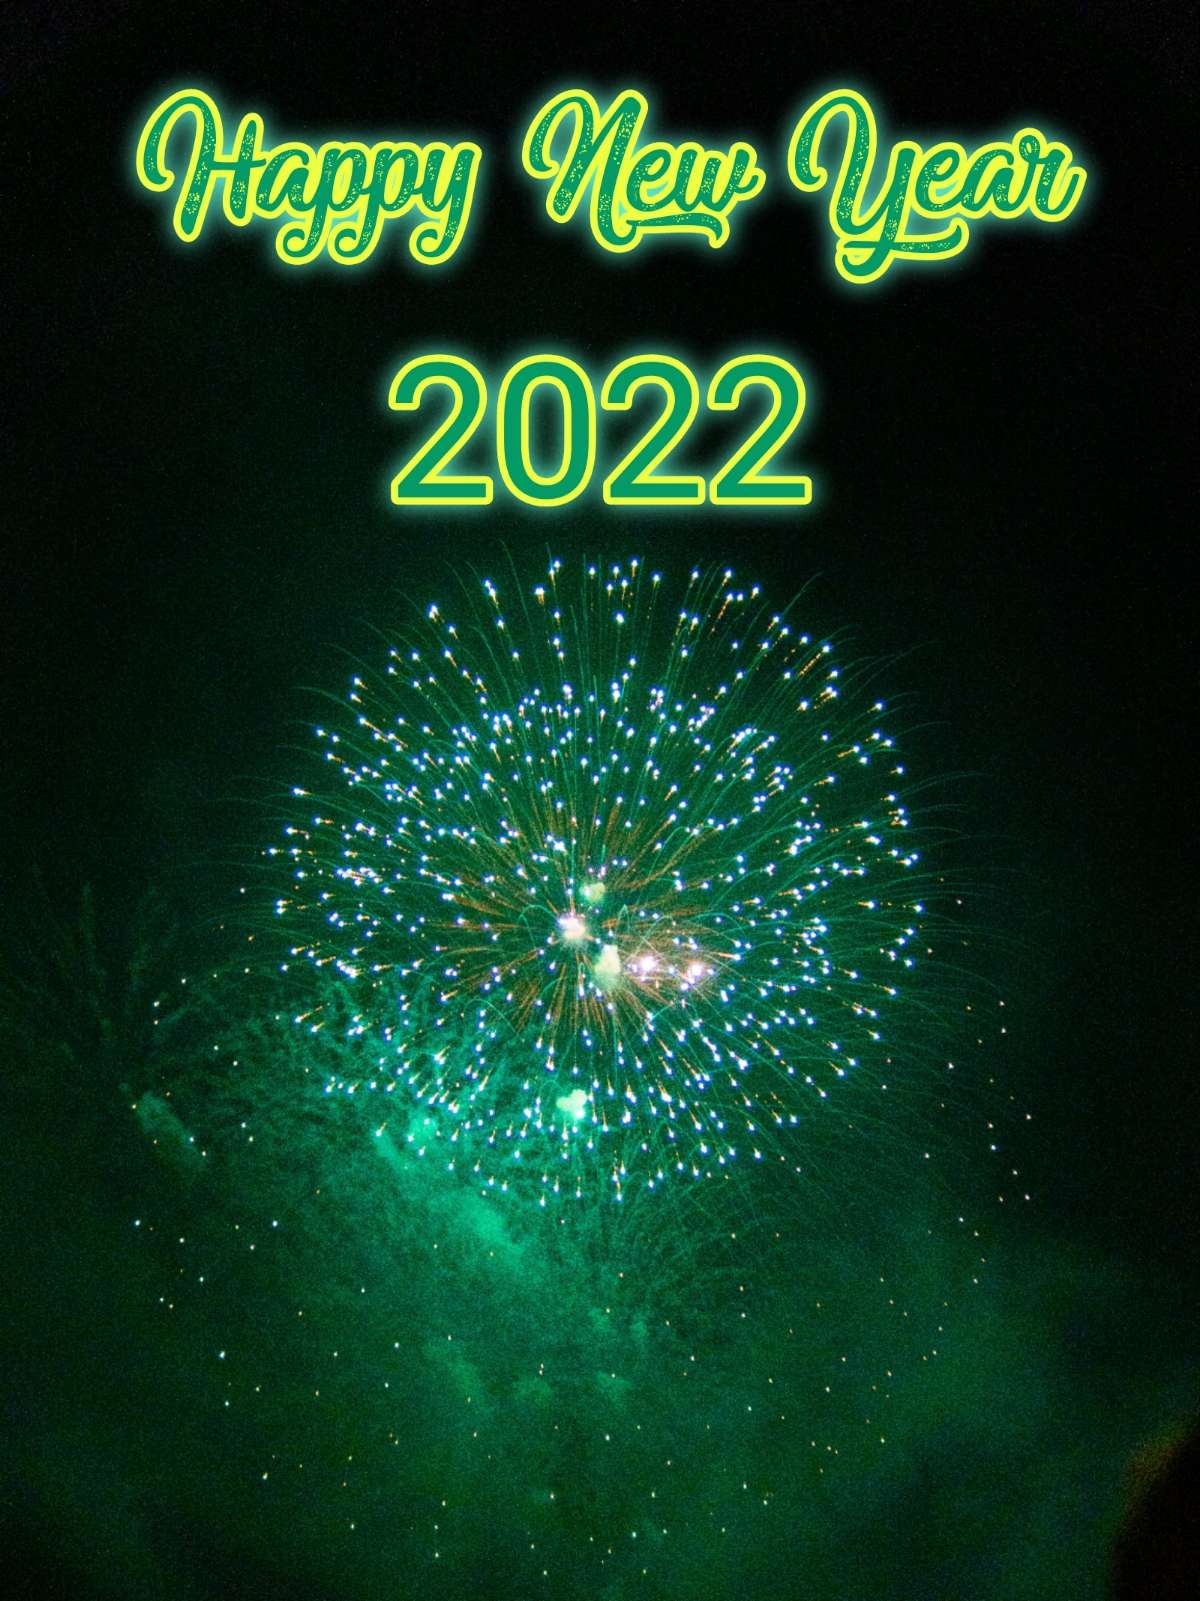 Happy New Year 2022 Free Images